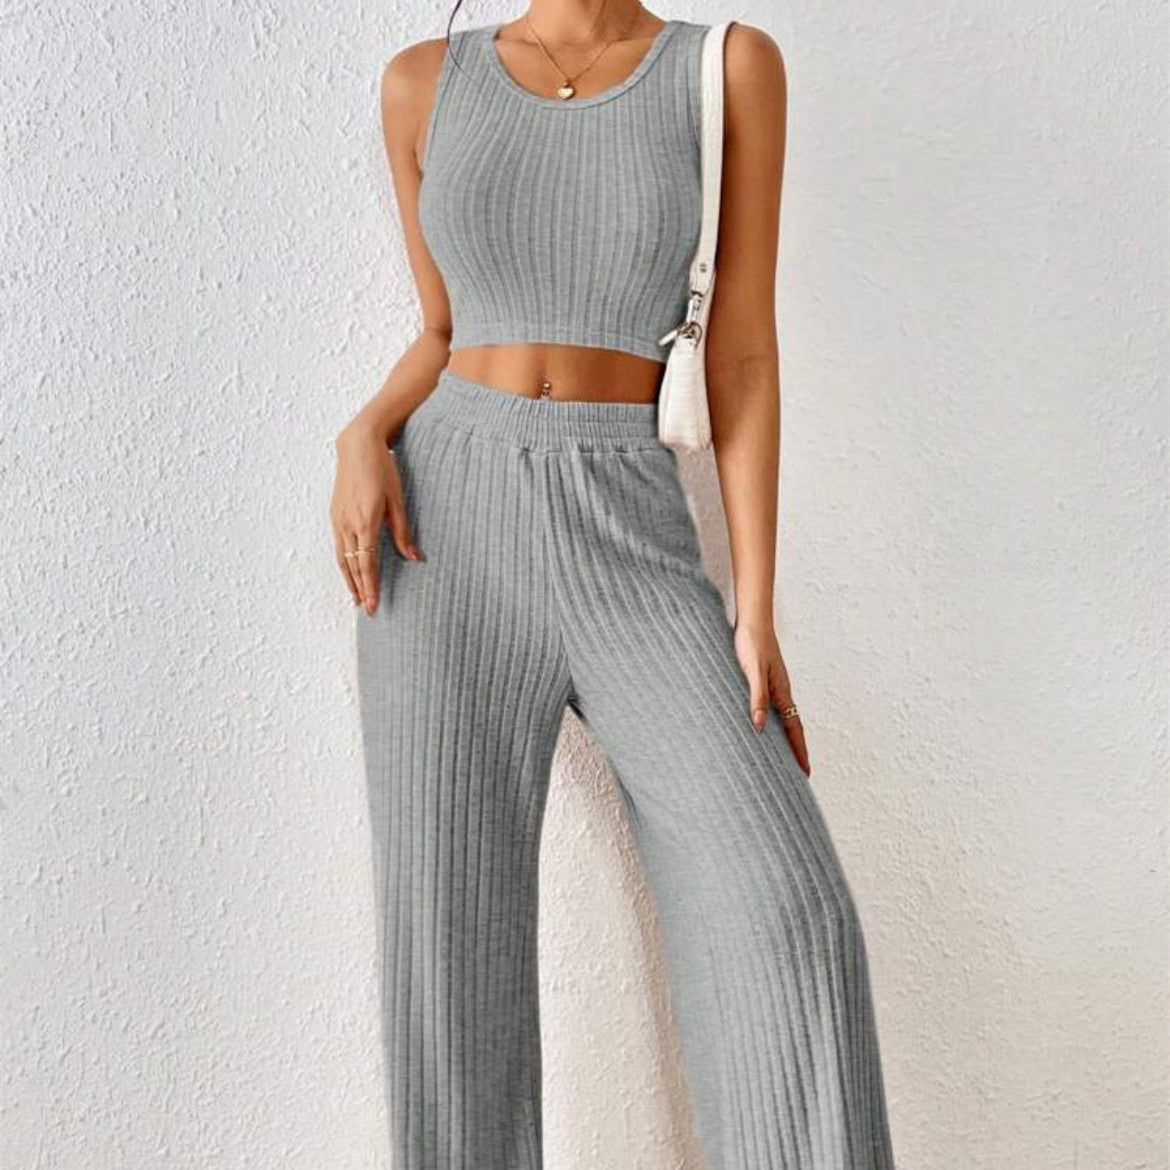 Fashionable Knitted Vest High Waist Trousers Suit